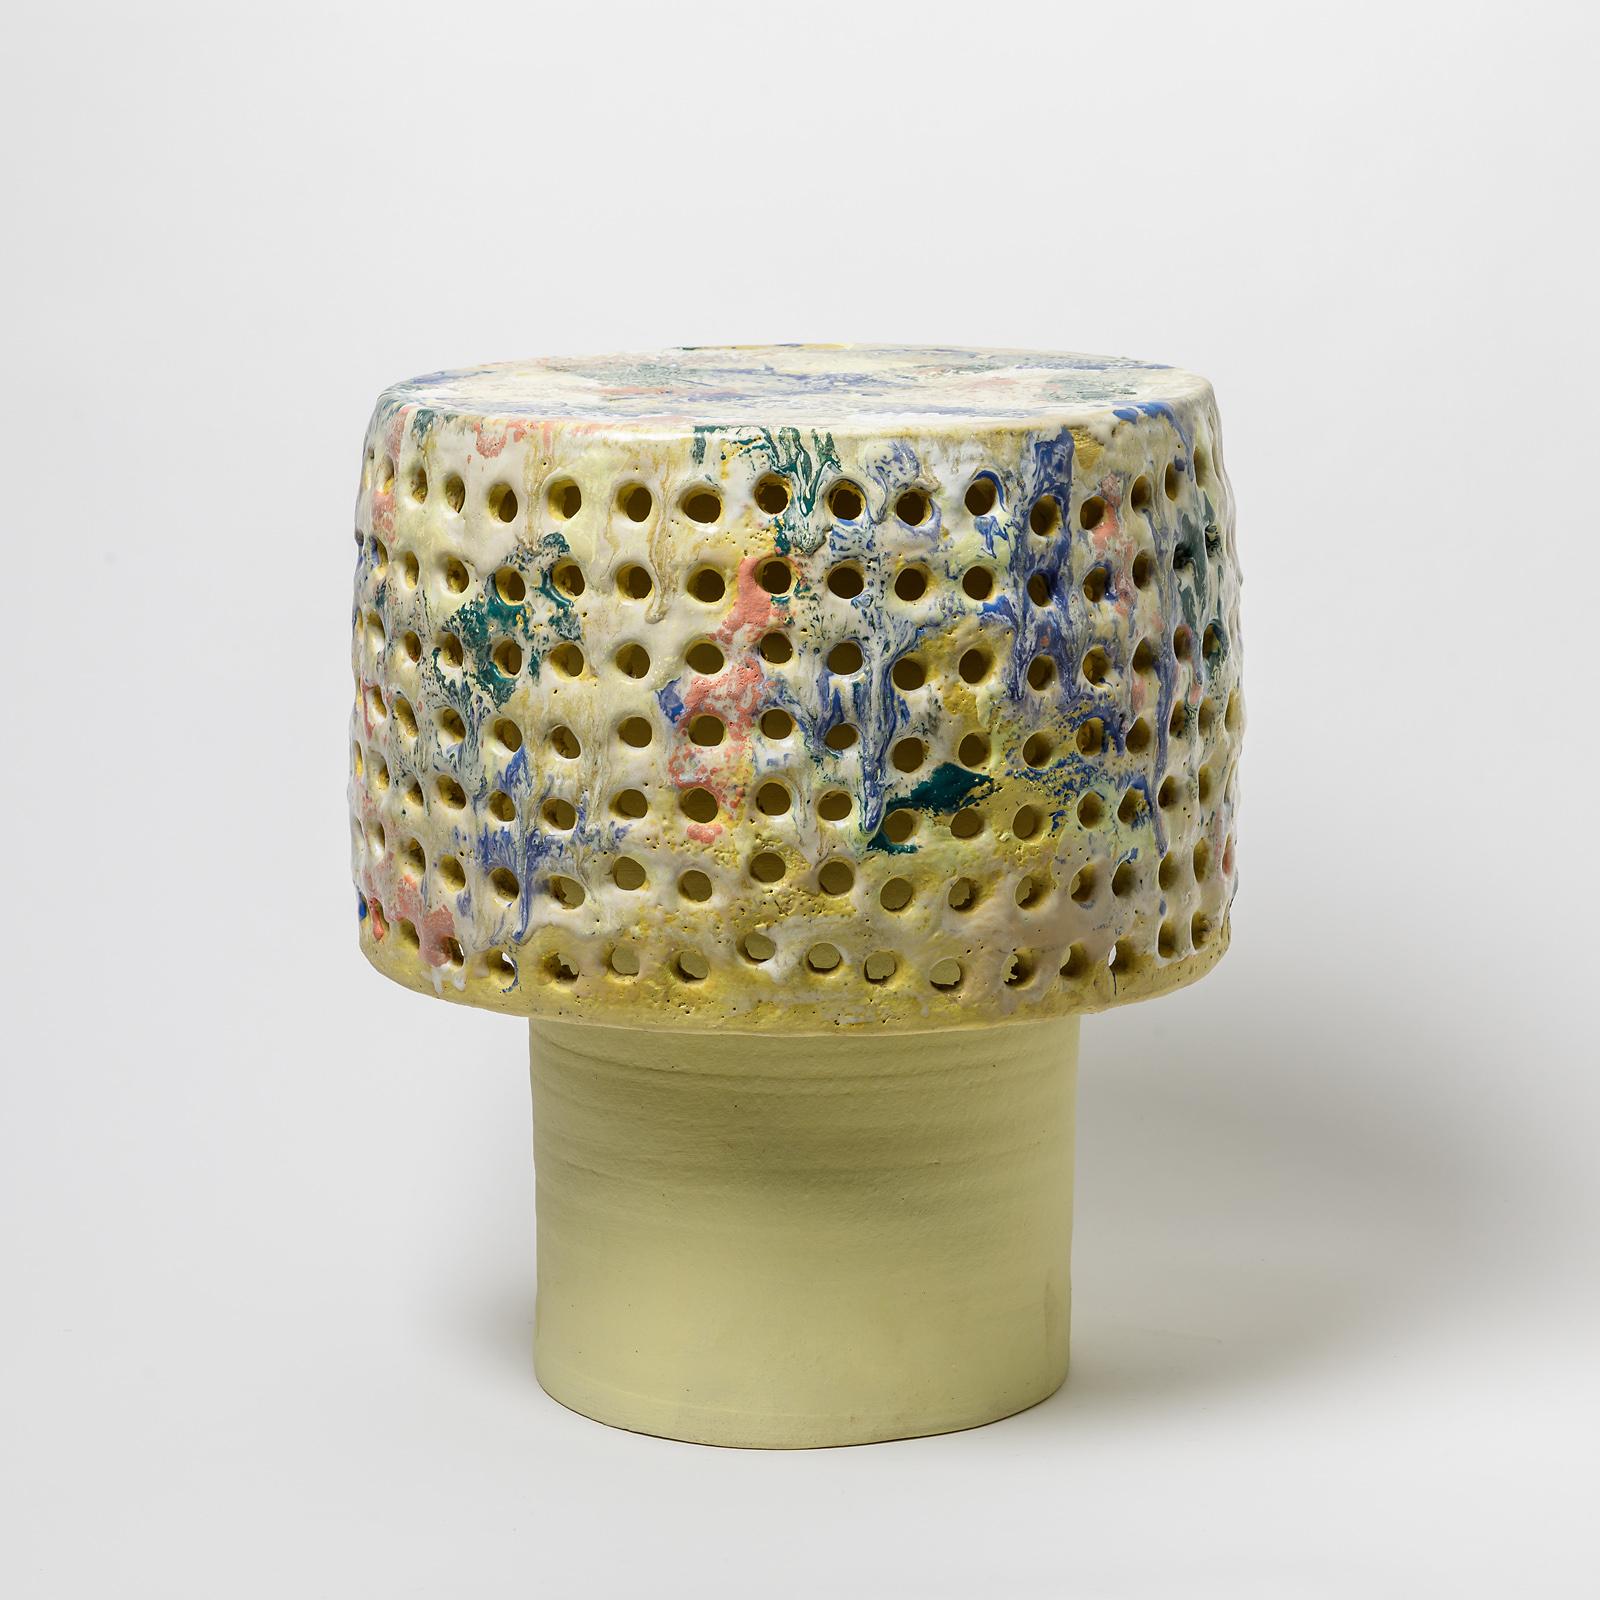 French Ceramic Stool or Table with Glazes Decoration by Mia Jensen, circa 2021